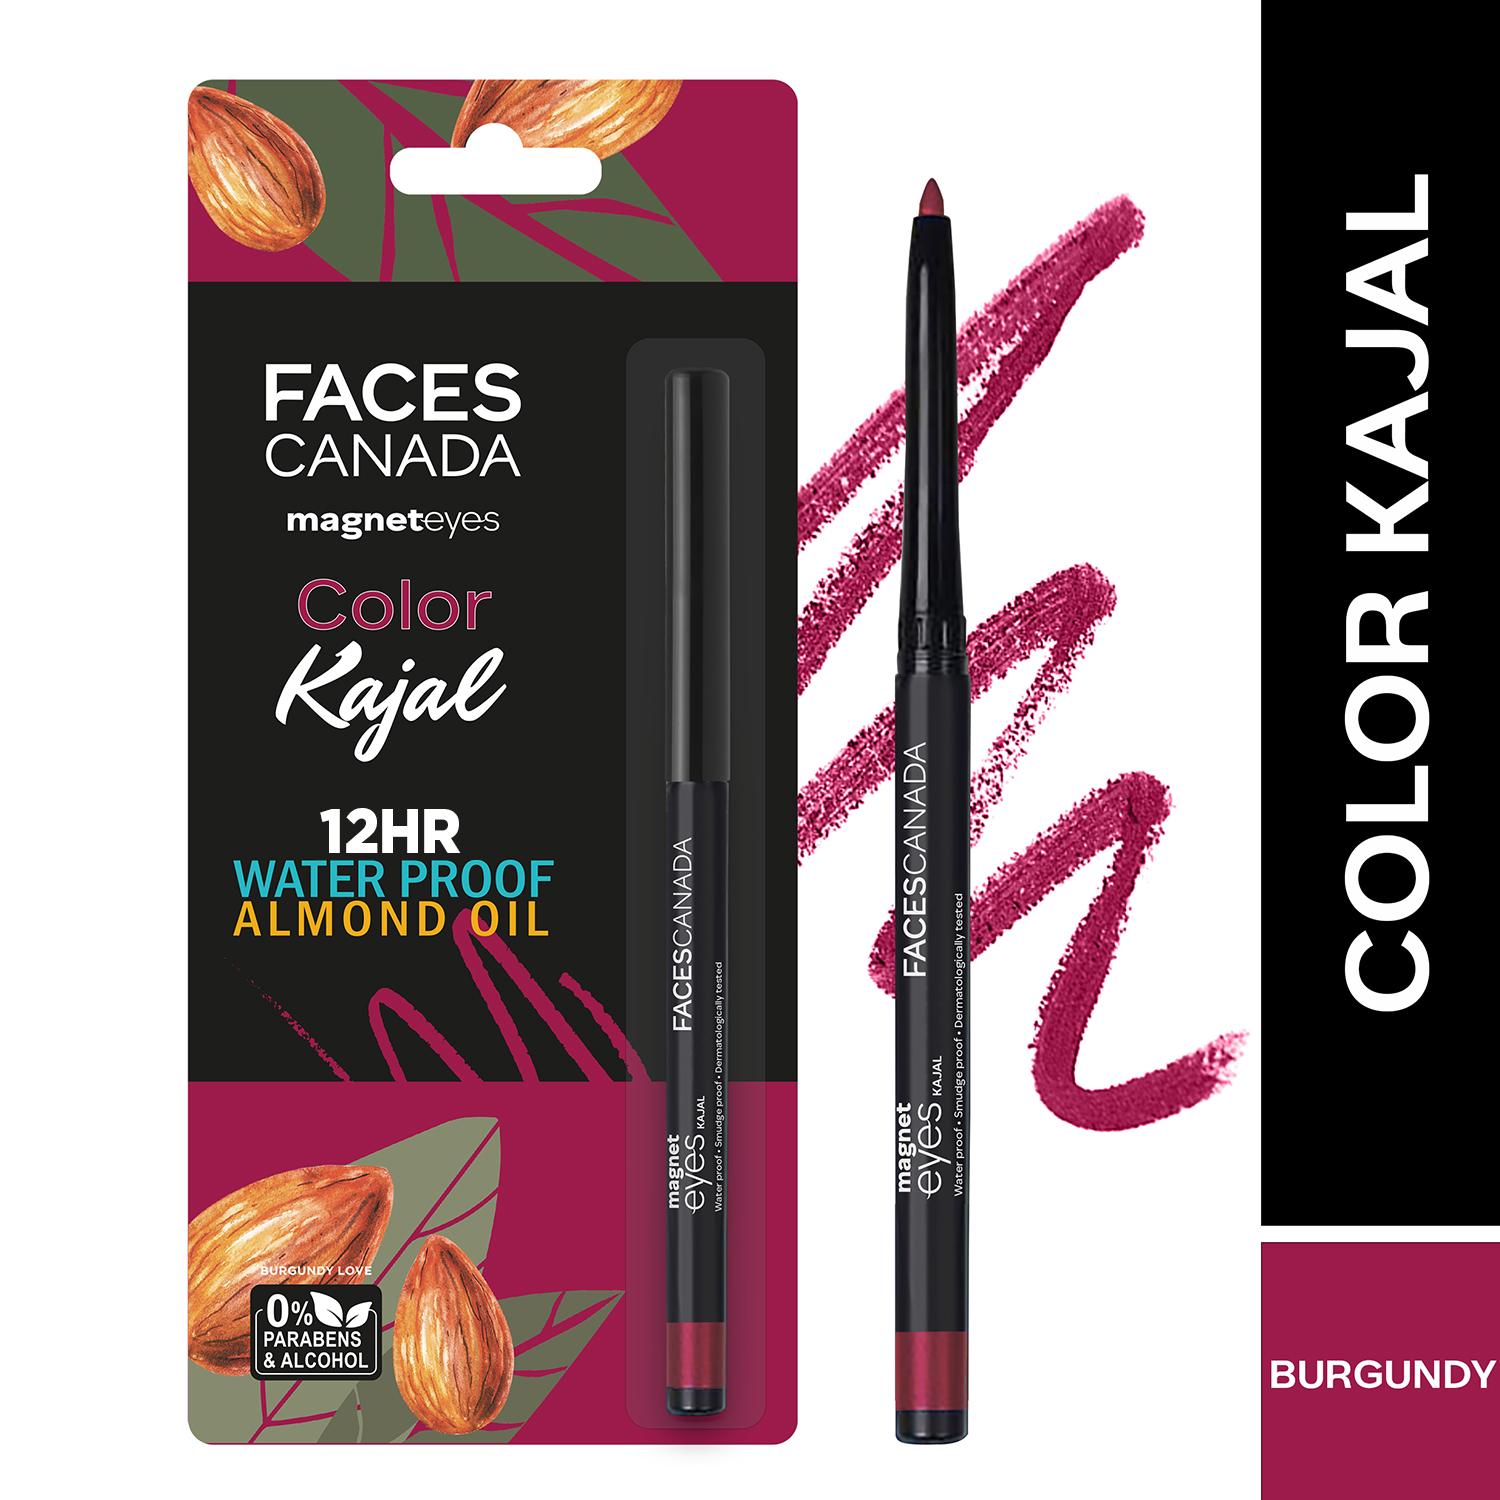 Faces Canada | Faces Canada Magneteyes Color Kajal, 12 HR Stay, Matte Finish,Water Proof -Burgundy Love 04 (0.30 g)